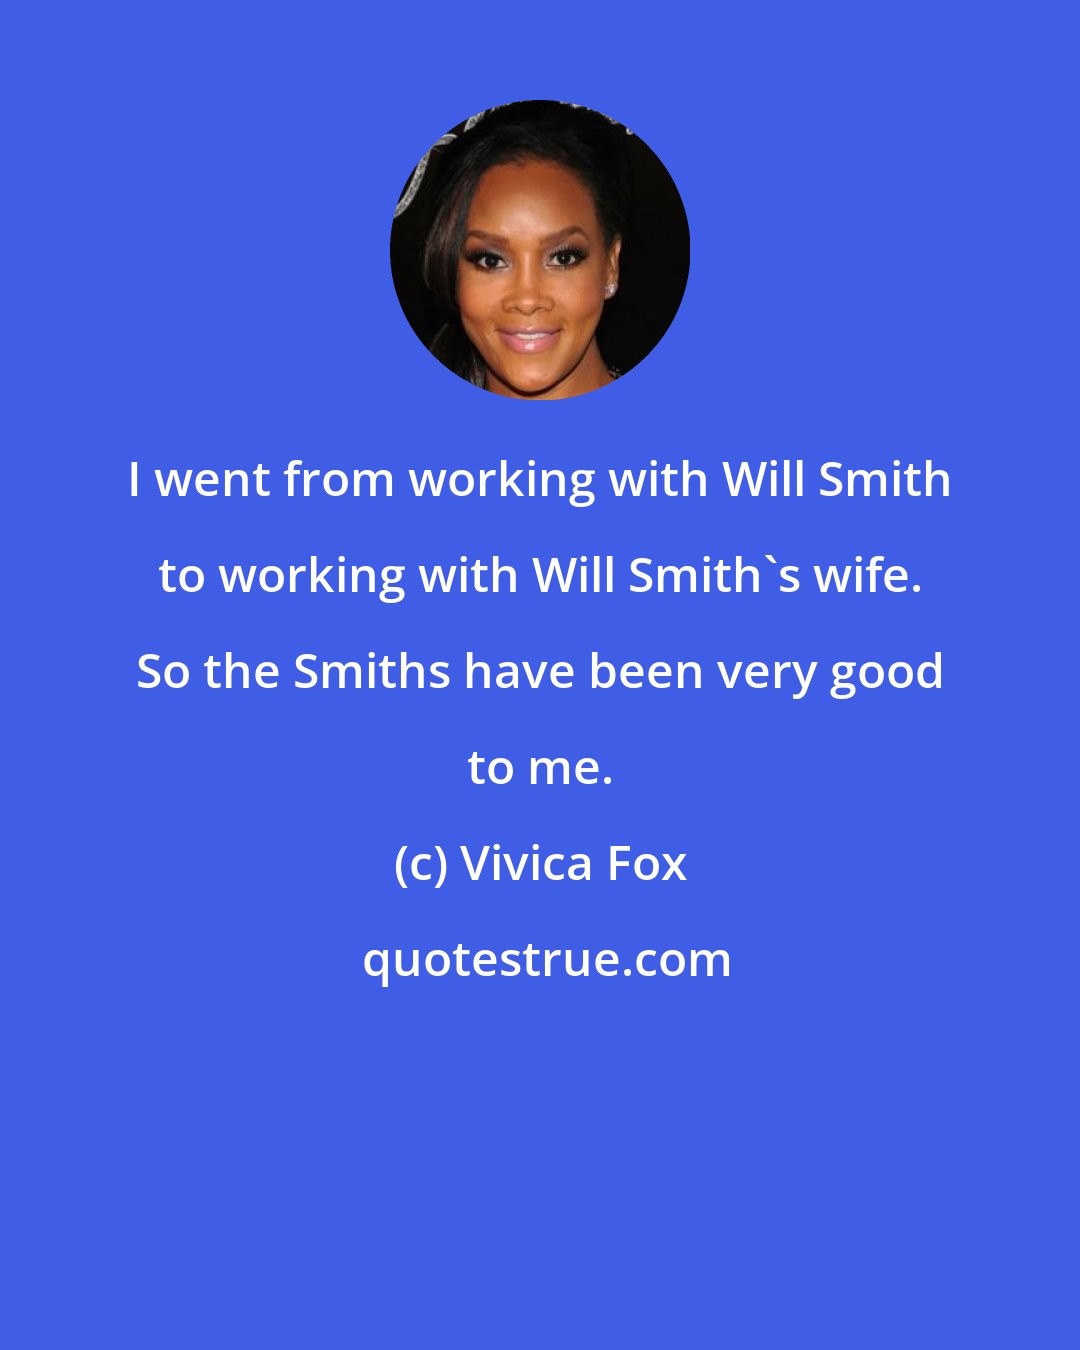 Vivica Fox: I went from working with Will Smith to working with Will Smith's wife. So the Smiths have been very good to me.